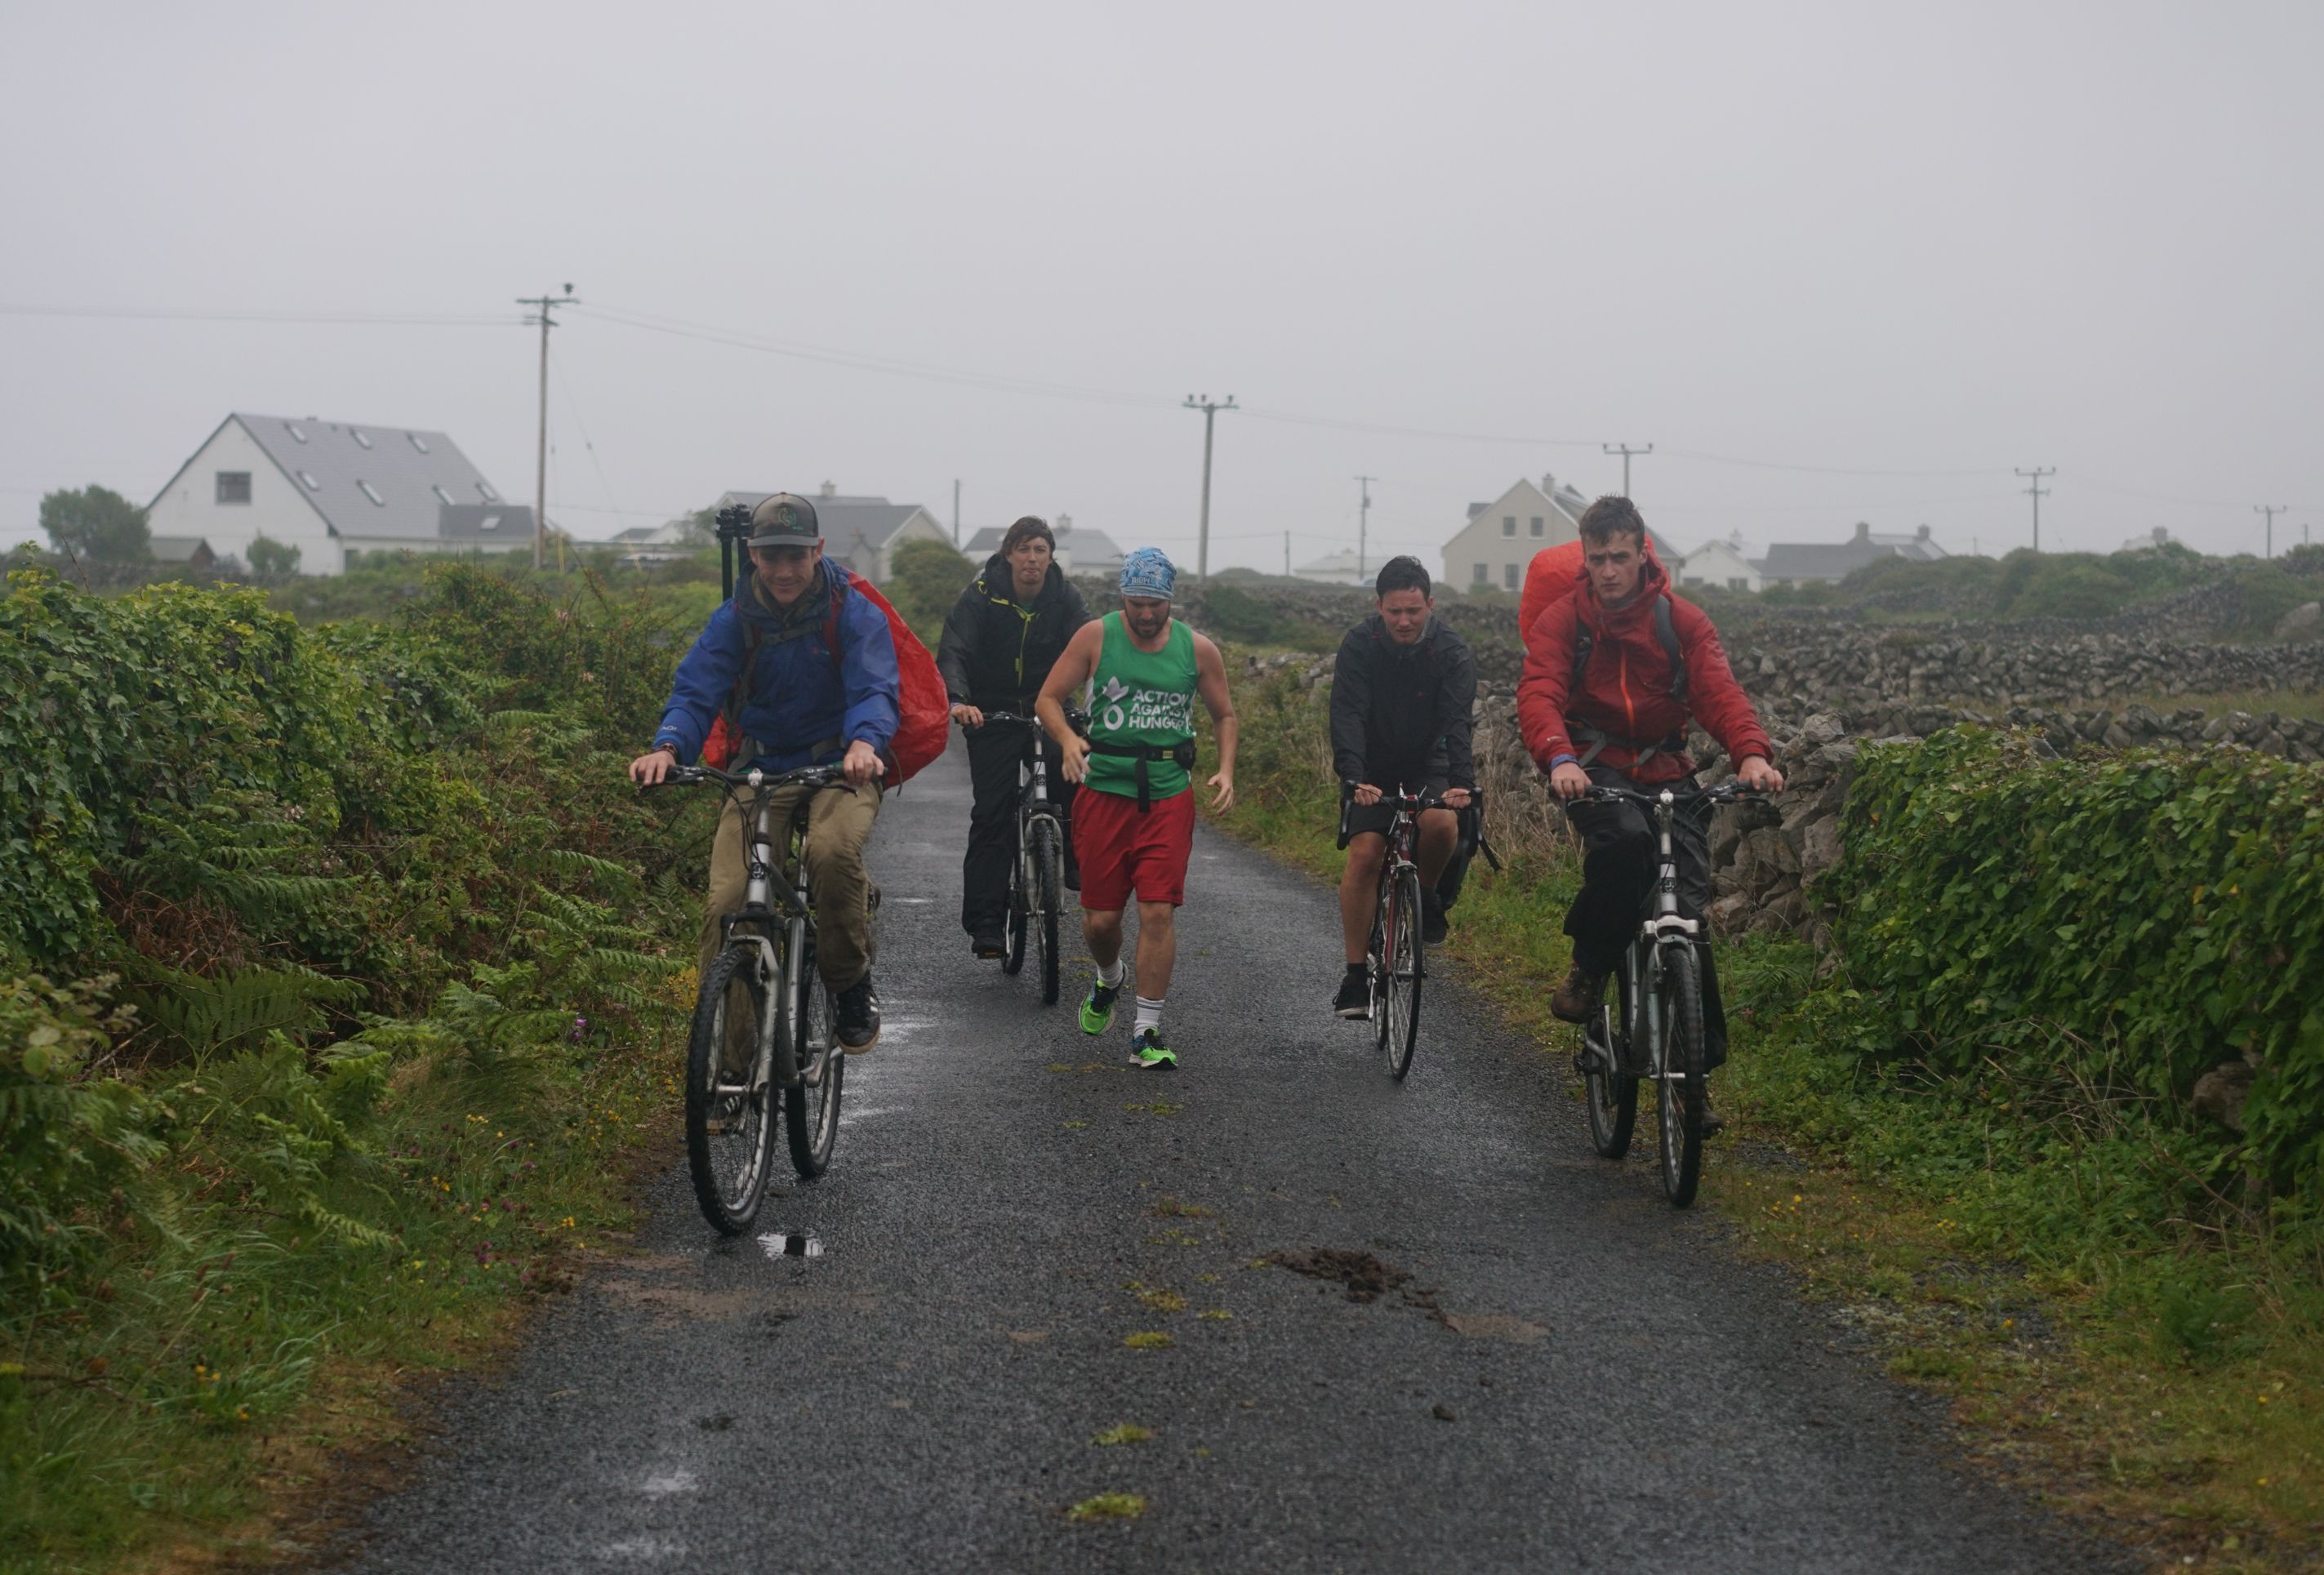 The crew of Dave Goes West rides bikes alongside Dave in the rain.